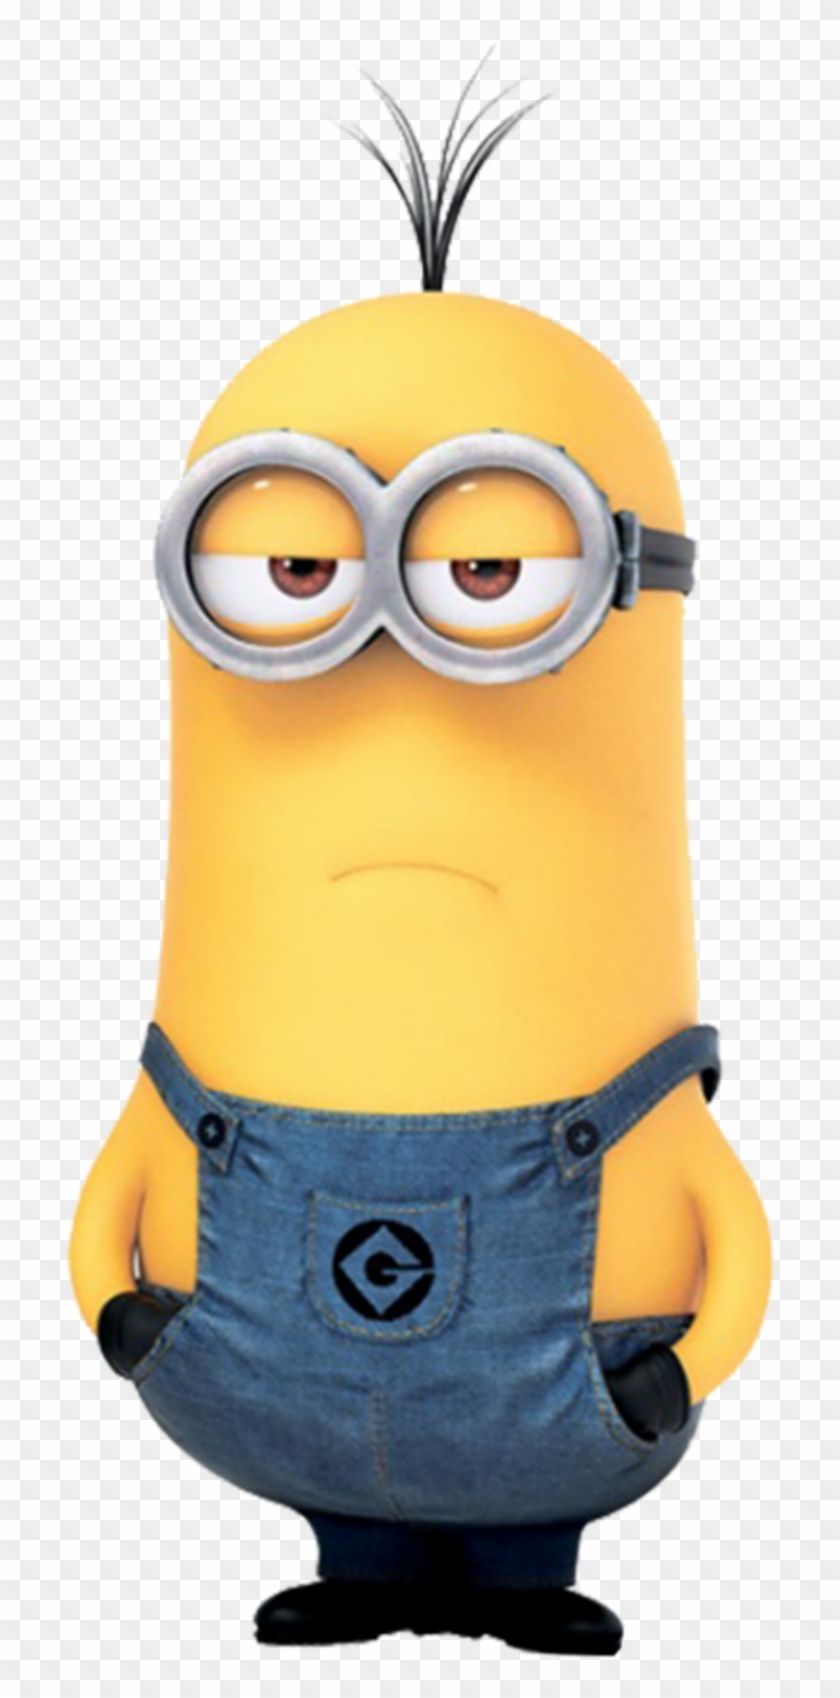 The Justin Quintanilla - Kevin The Minion Clipart, transparent png image.